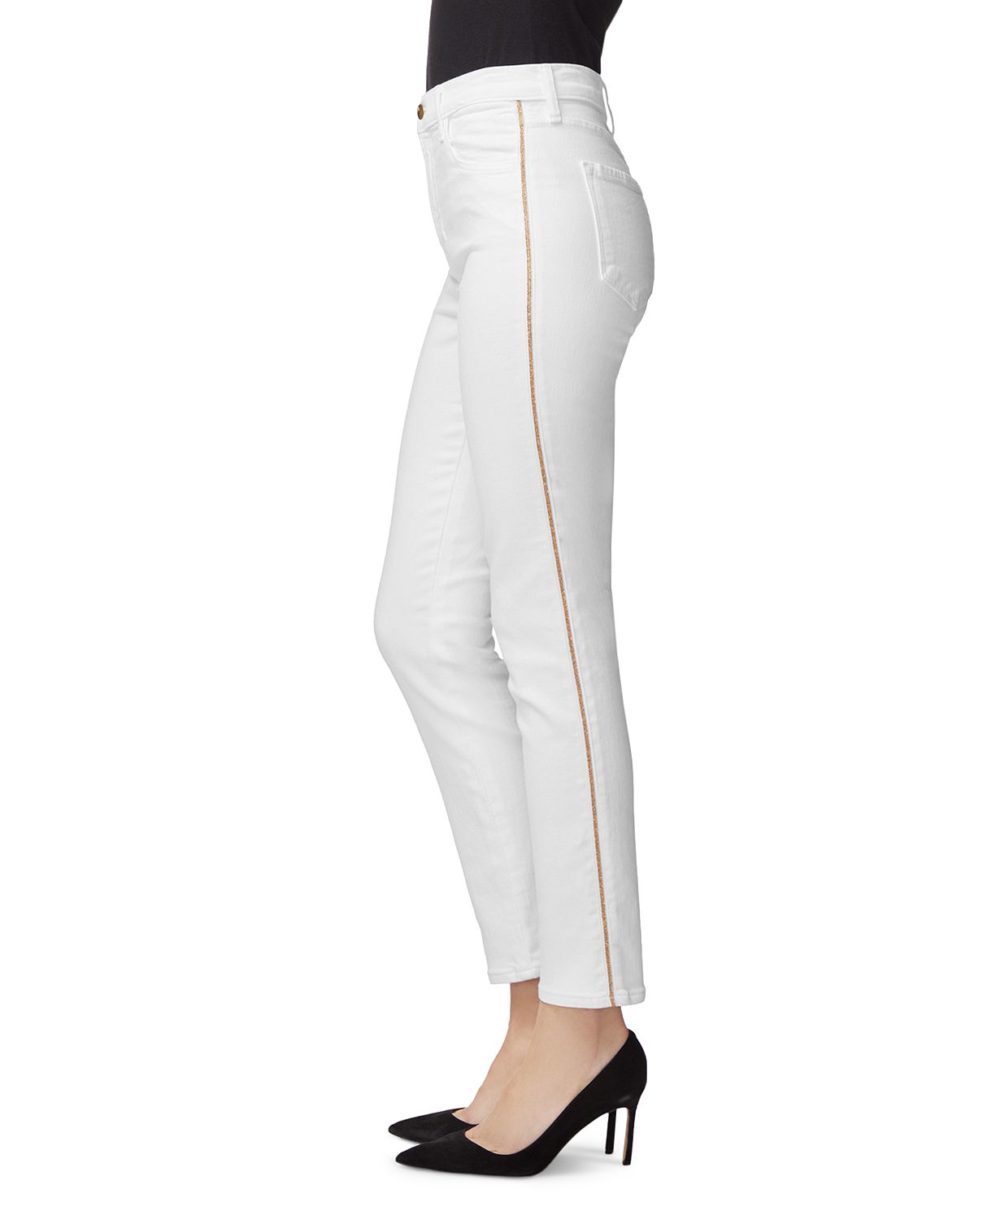 woocommerce-673321-2209615.cloudwaysapps.com-j-brand-womens-white-ruby-high-rise-crop-cigarette-jeans